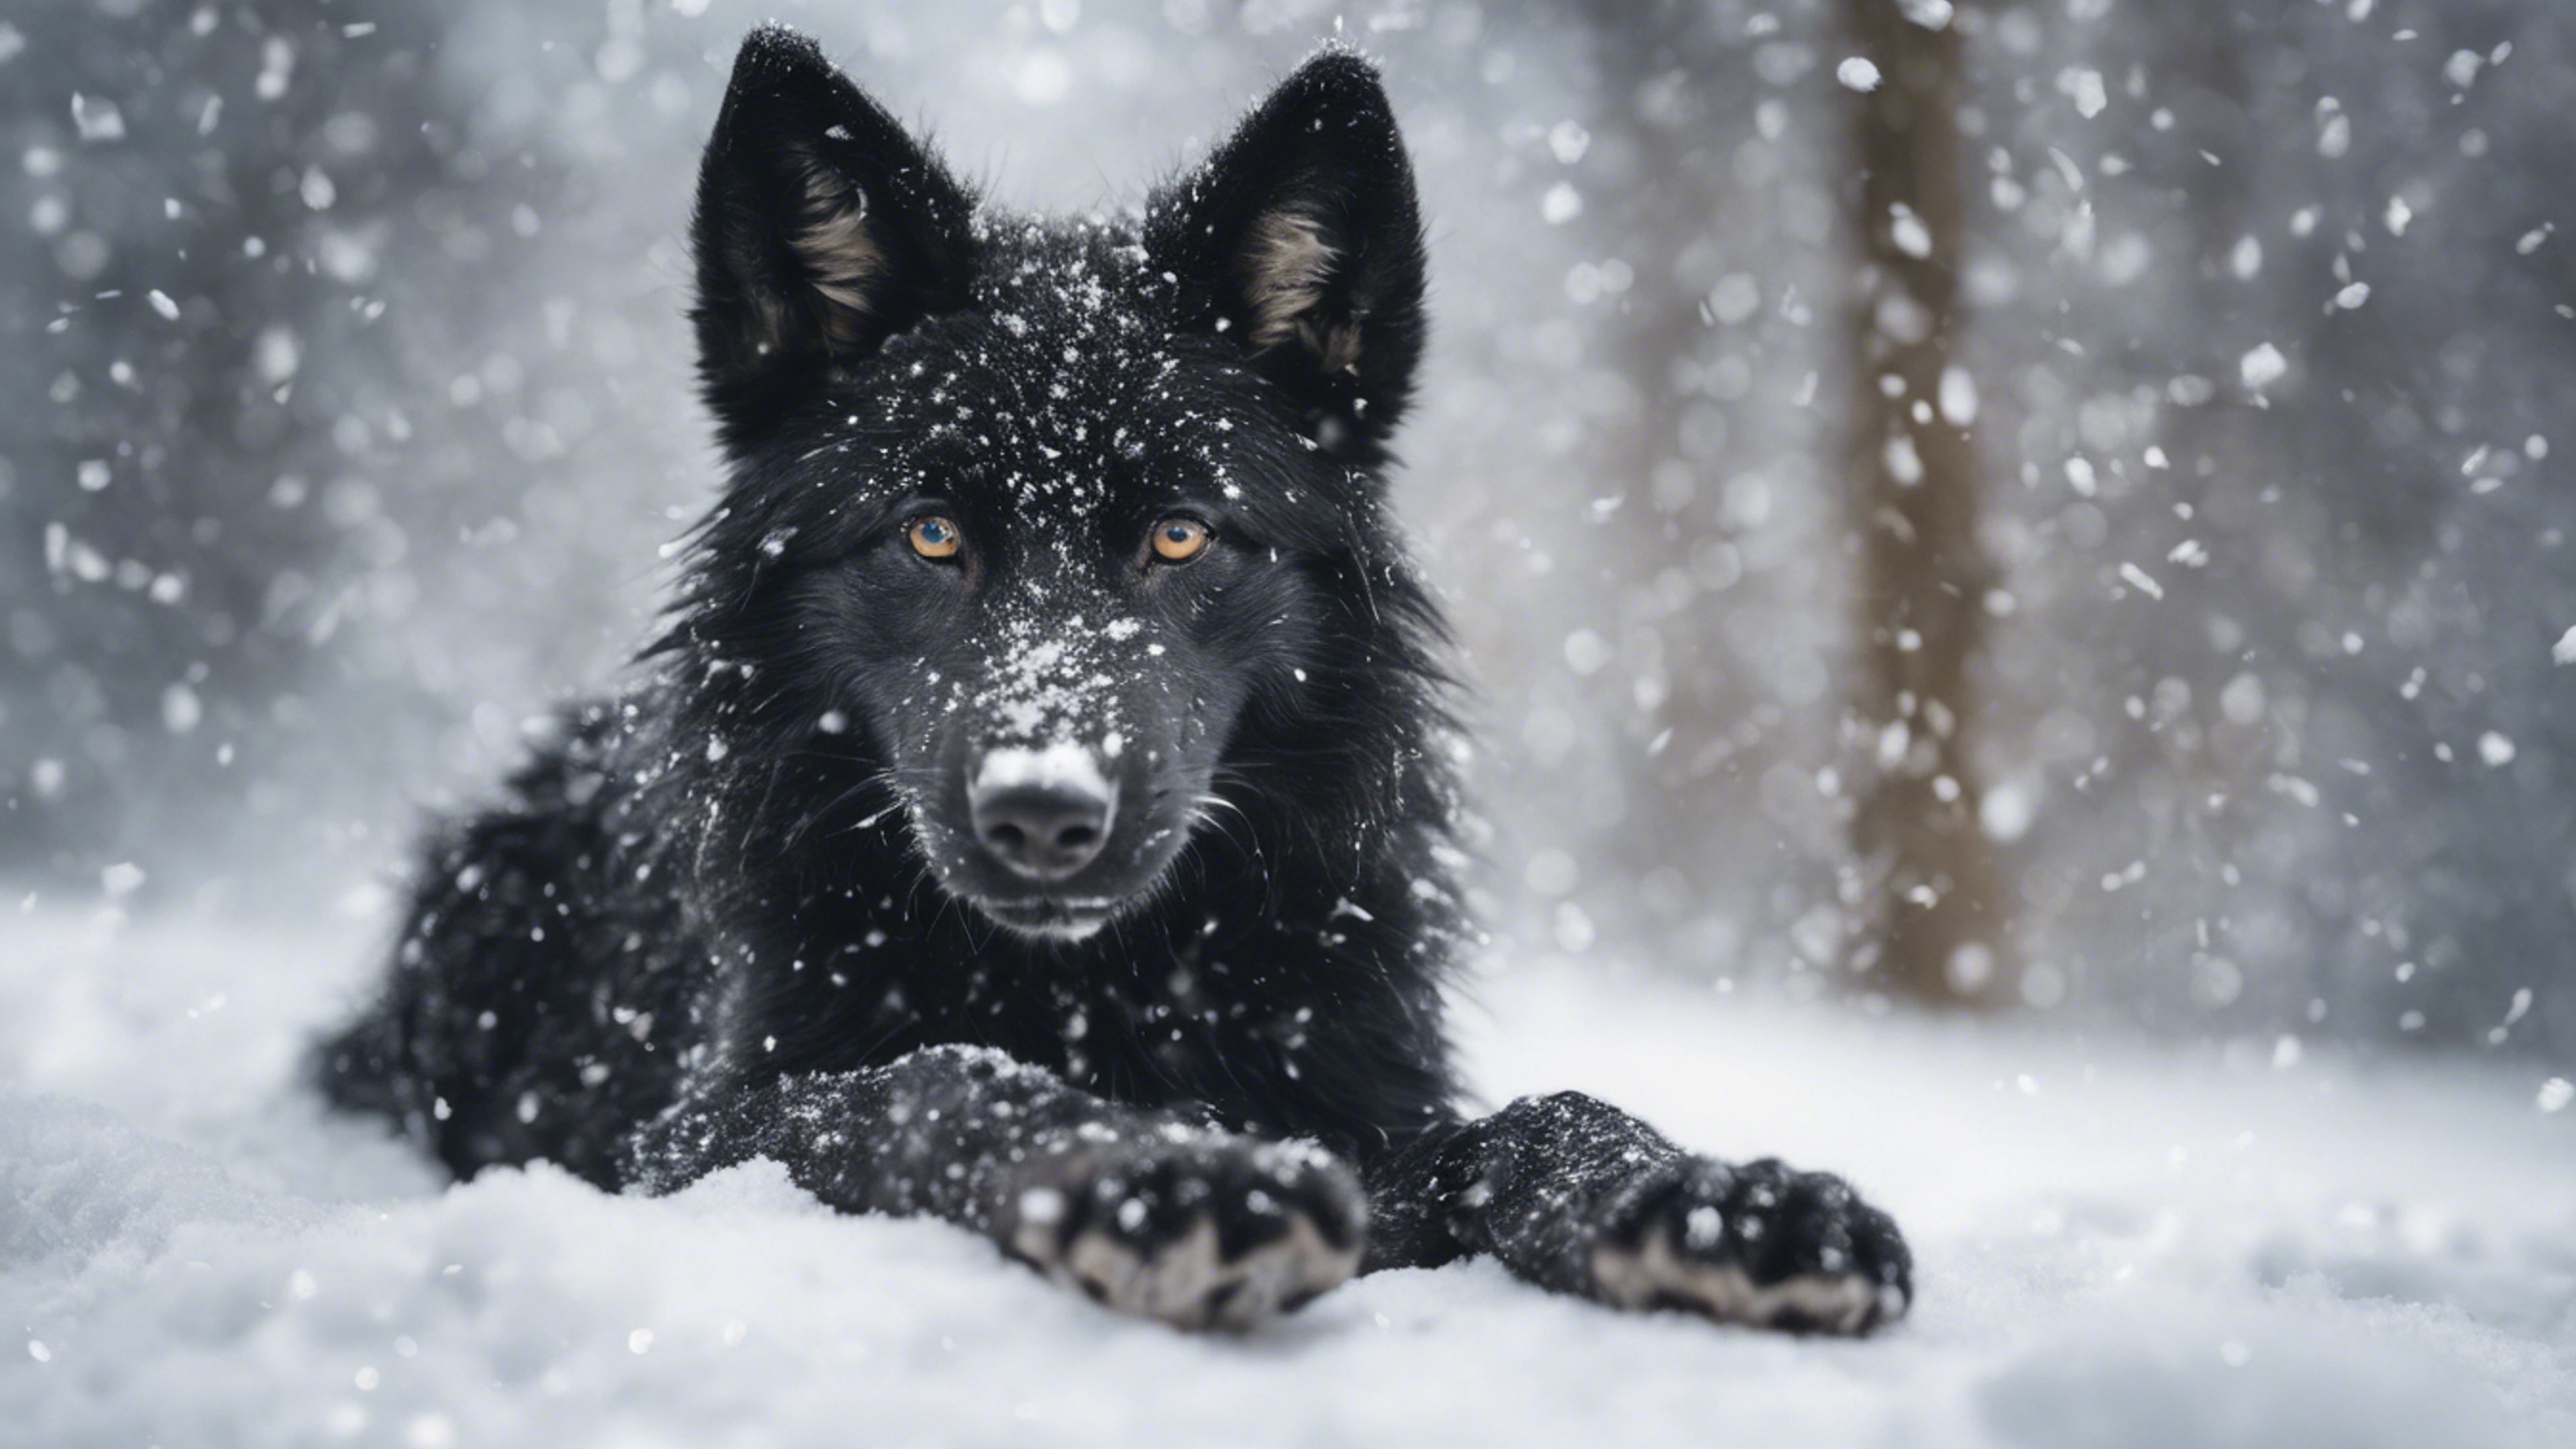 A playful black wolf puppy making the first snow angel of its life. Hintergrund[6a2907d16c81420c9dae]